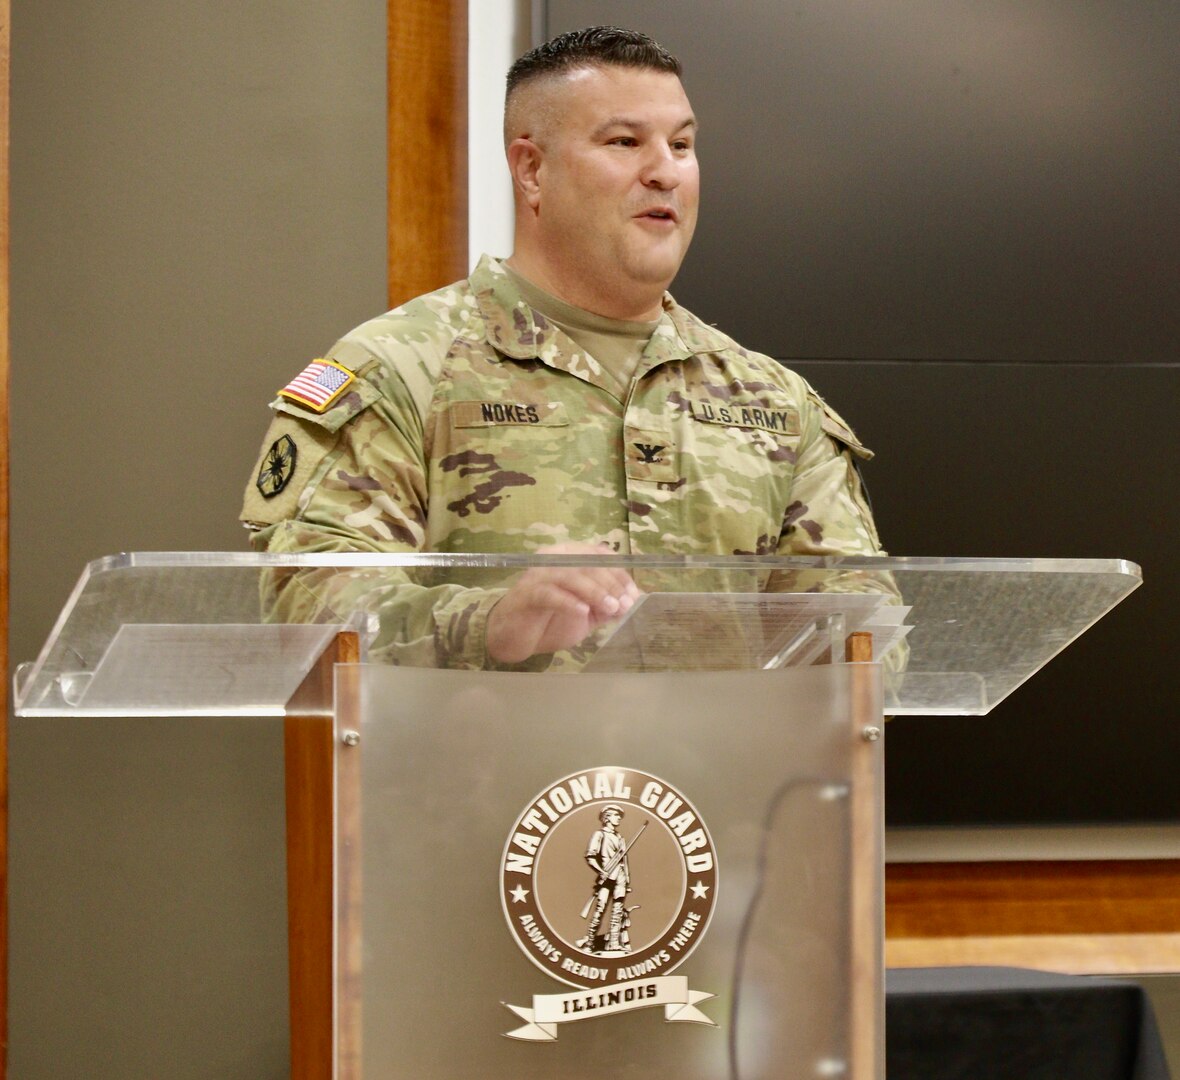 Illinois Army National Guard Col. Shawn Nokes of Springfield assumed command of the 129th Regiment (Regional Training Institute) at the unit's headquarters in the Illinois Military Academy on Camp Lincoln in Springfield on June 10.